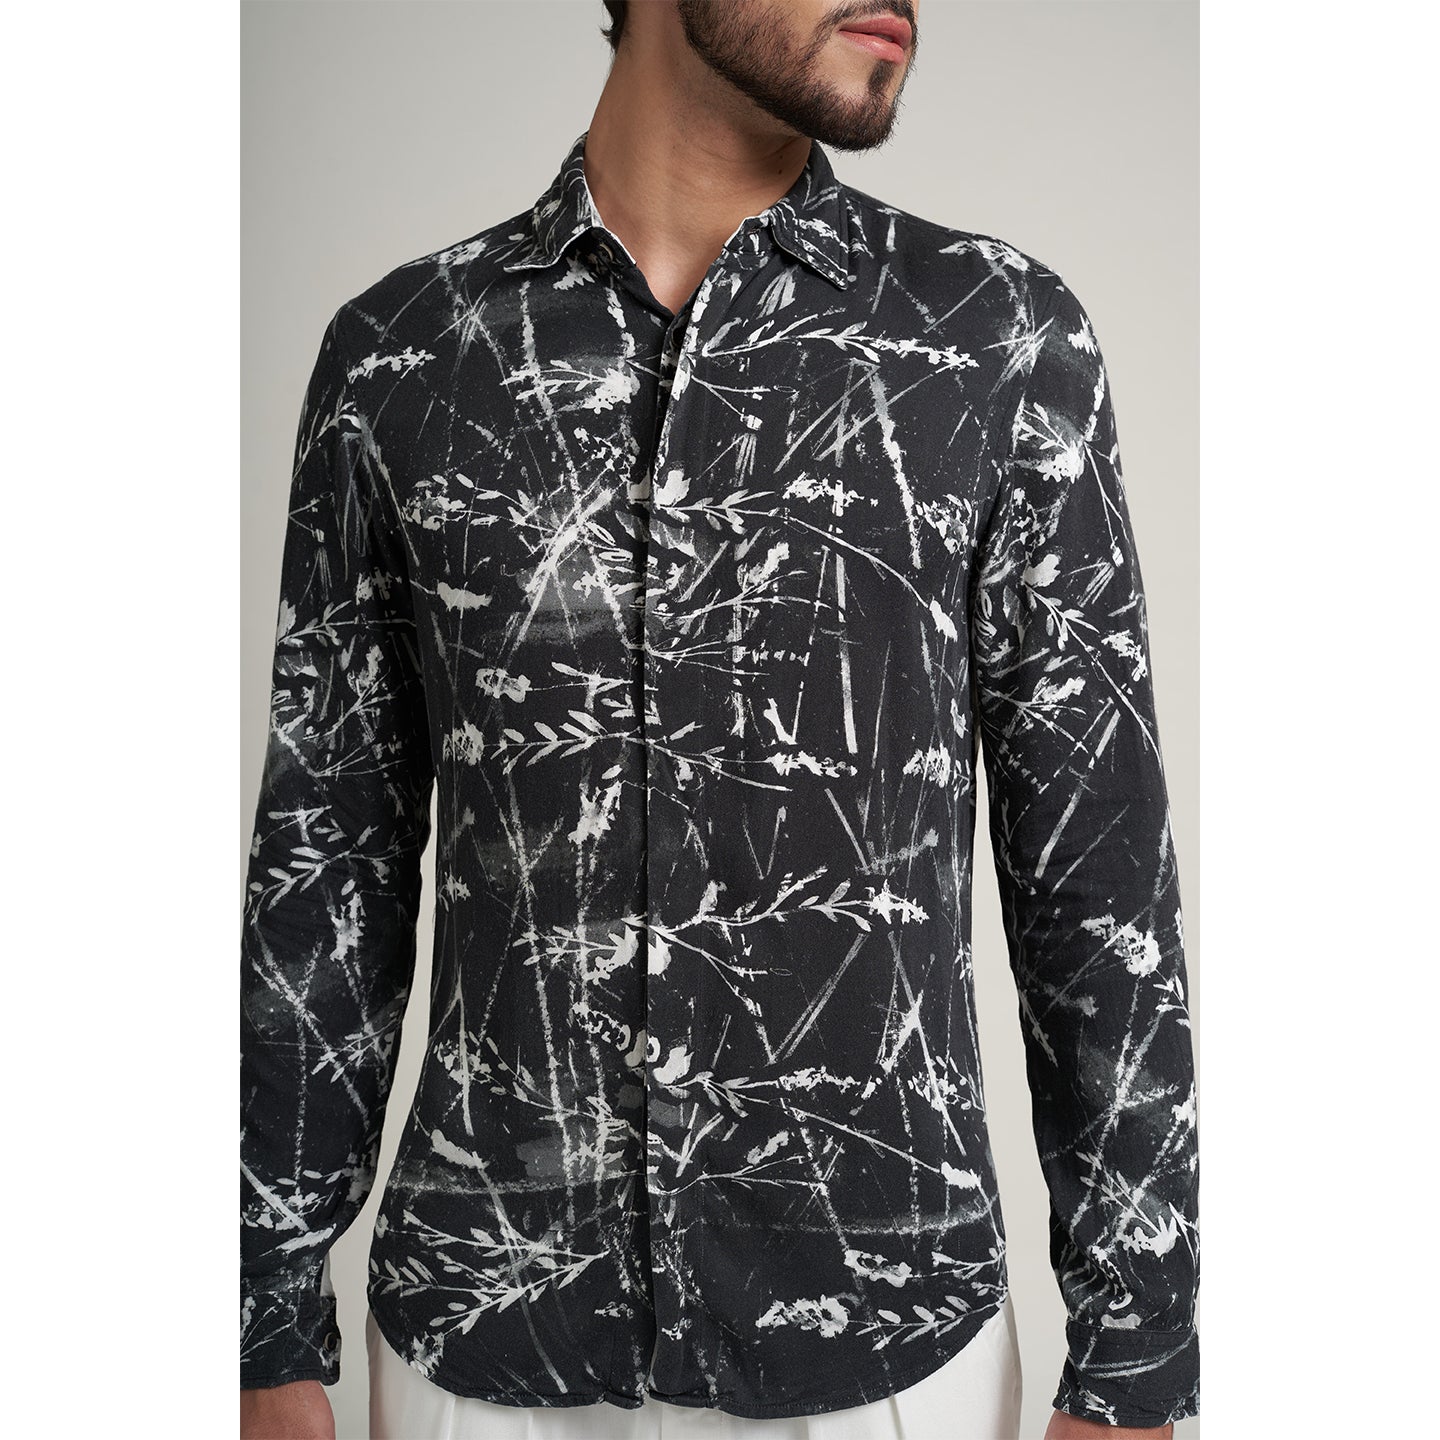 Organic lotus stem fabric printed shirt in black and white leafy print. the shirt has round bottom hem with a comfort fit